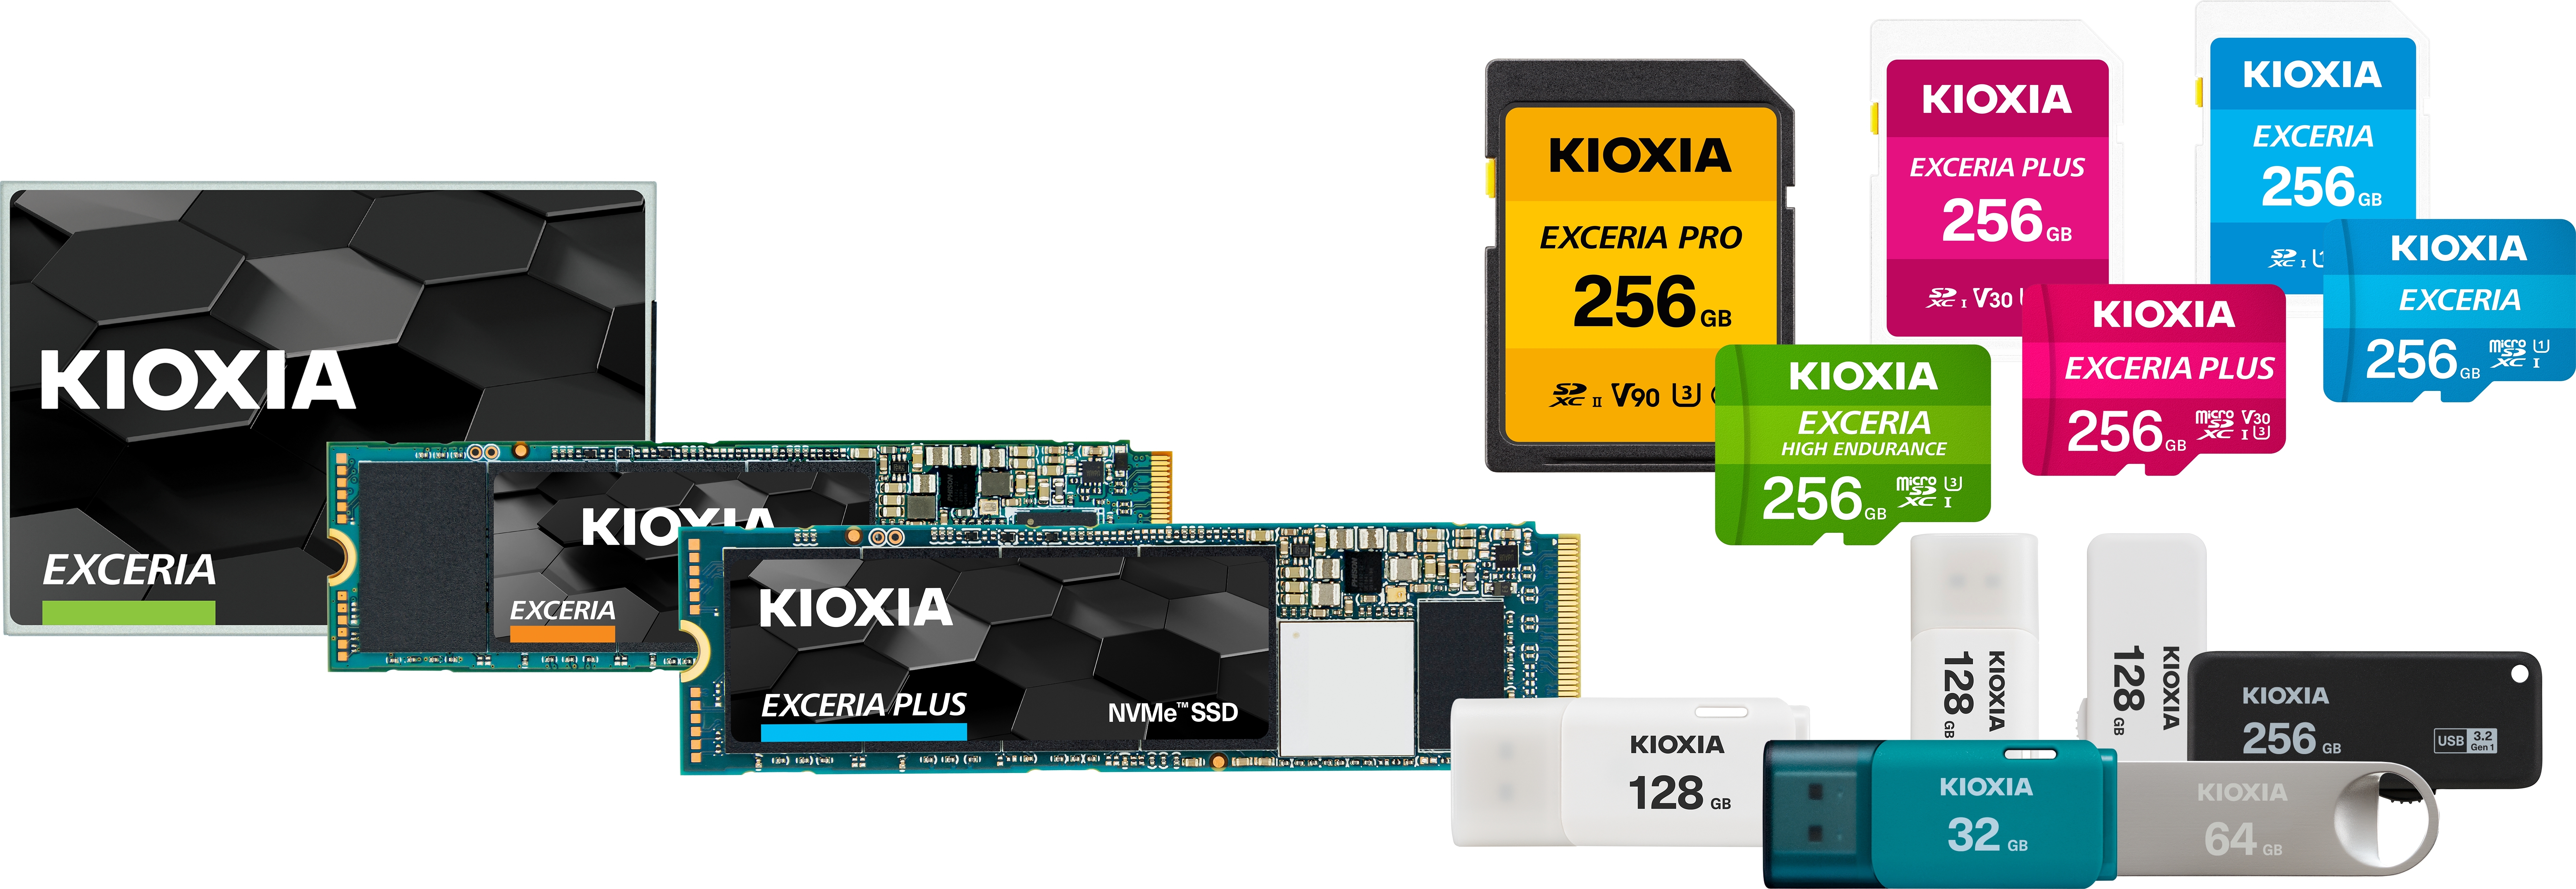 Kioxia Corporation Announces Launch of New Brand Consumer Product Portfolio  (microSD/SD Memory Cards, USB Memory and SSDs)